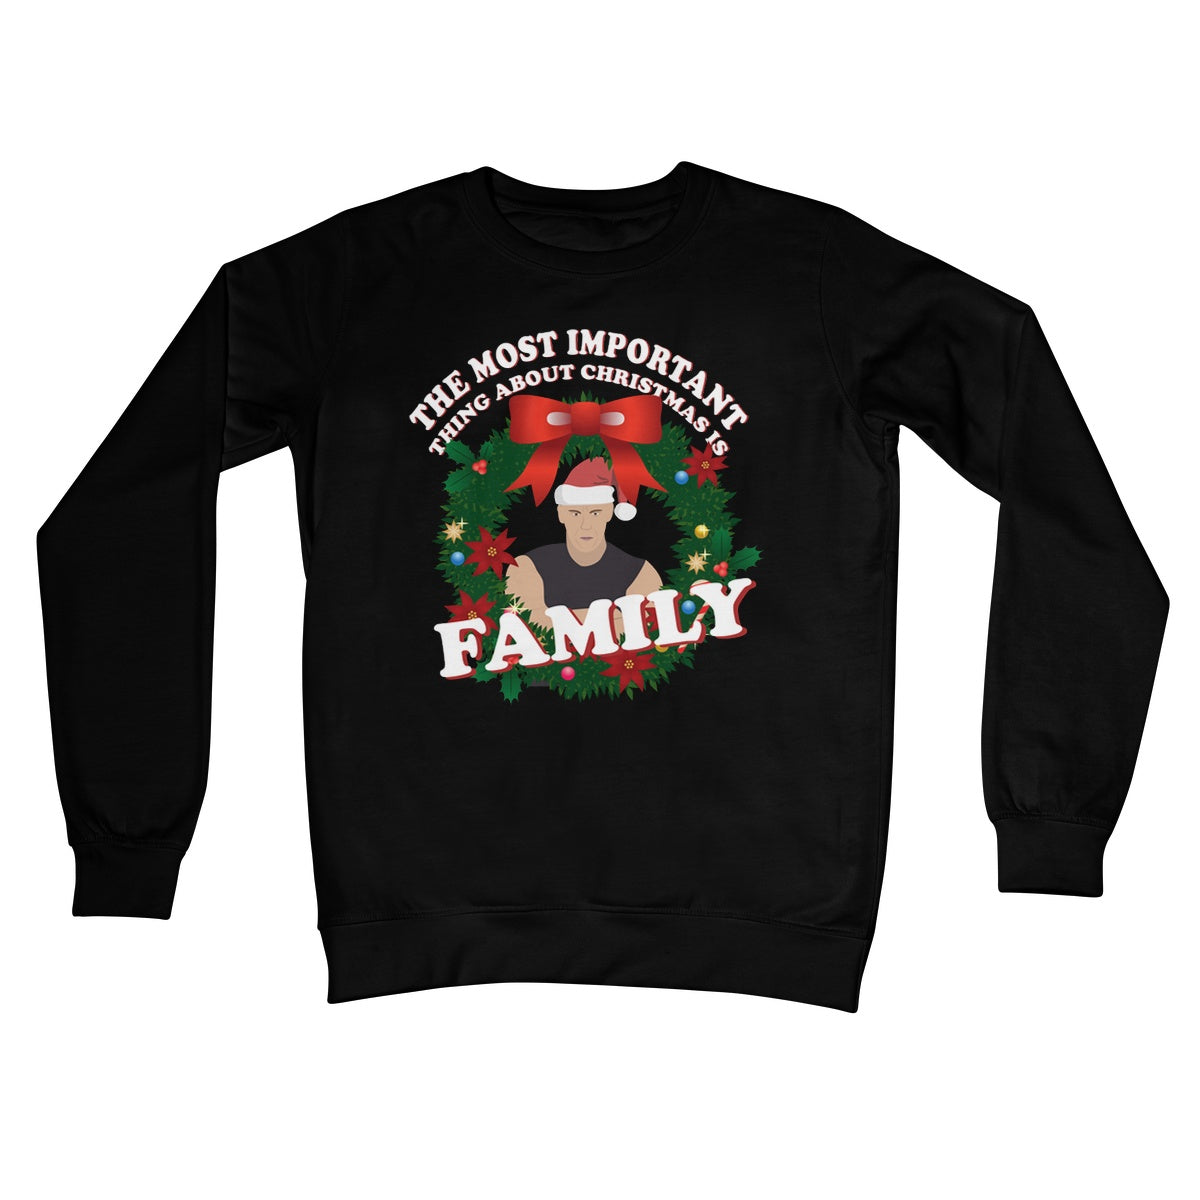 The Most Important Thing At Christmas is FAMILY Vin Diesel Film Gift Celebrity Quote Funny Crew Neck Sweatshirt